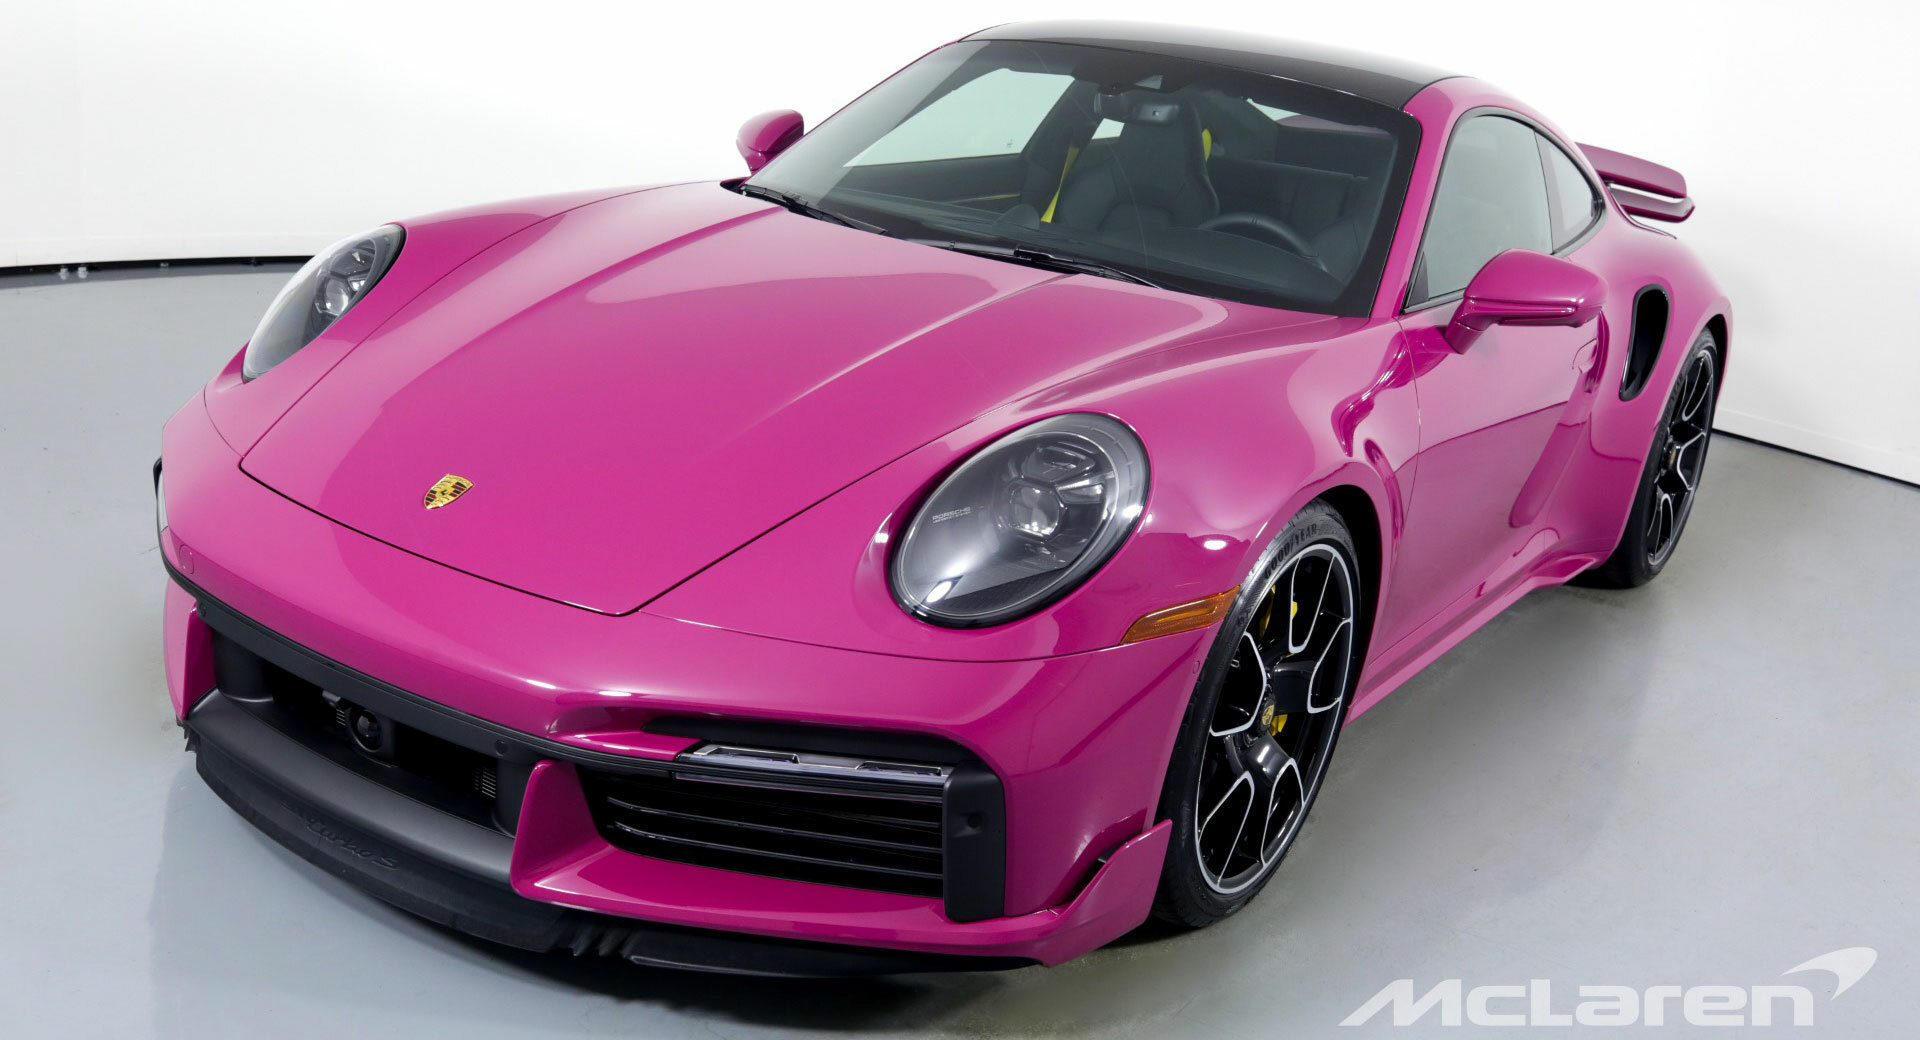 Can You Handle This Porsche 911 Turbo S In Rubystone Red? | Carscoops